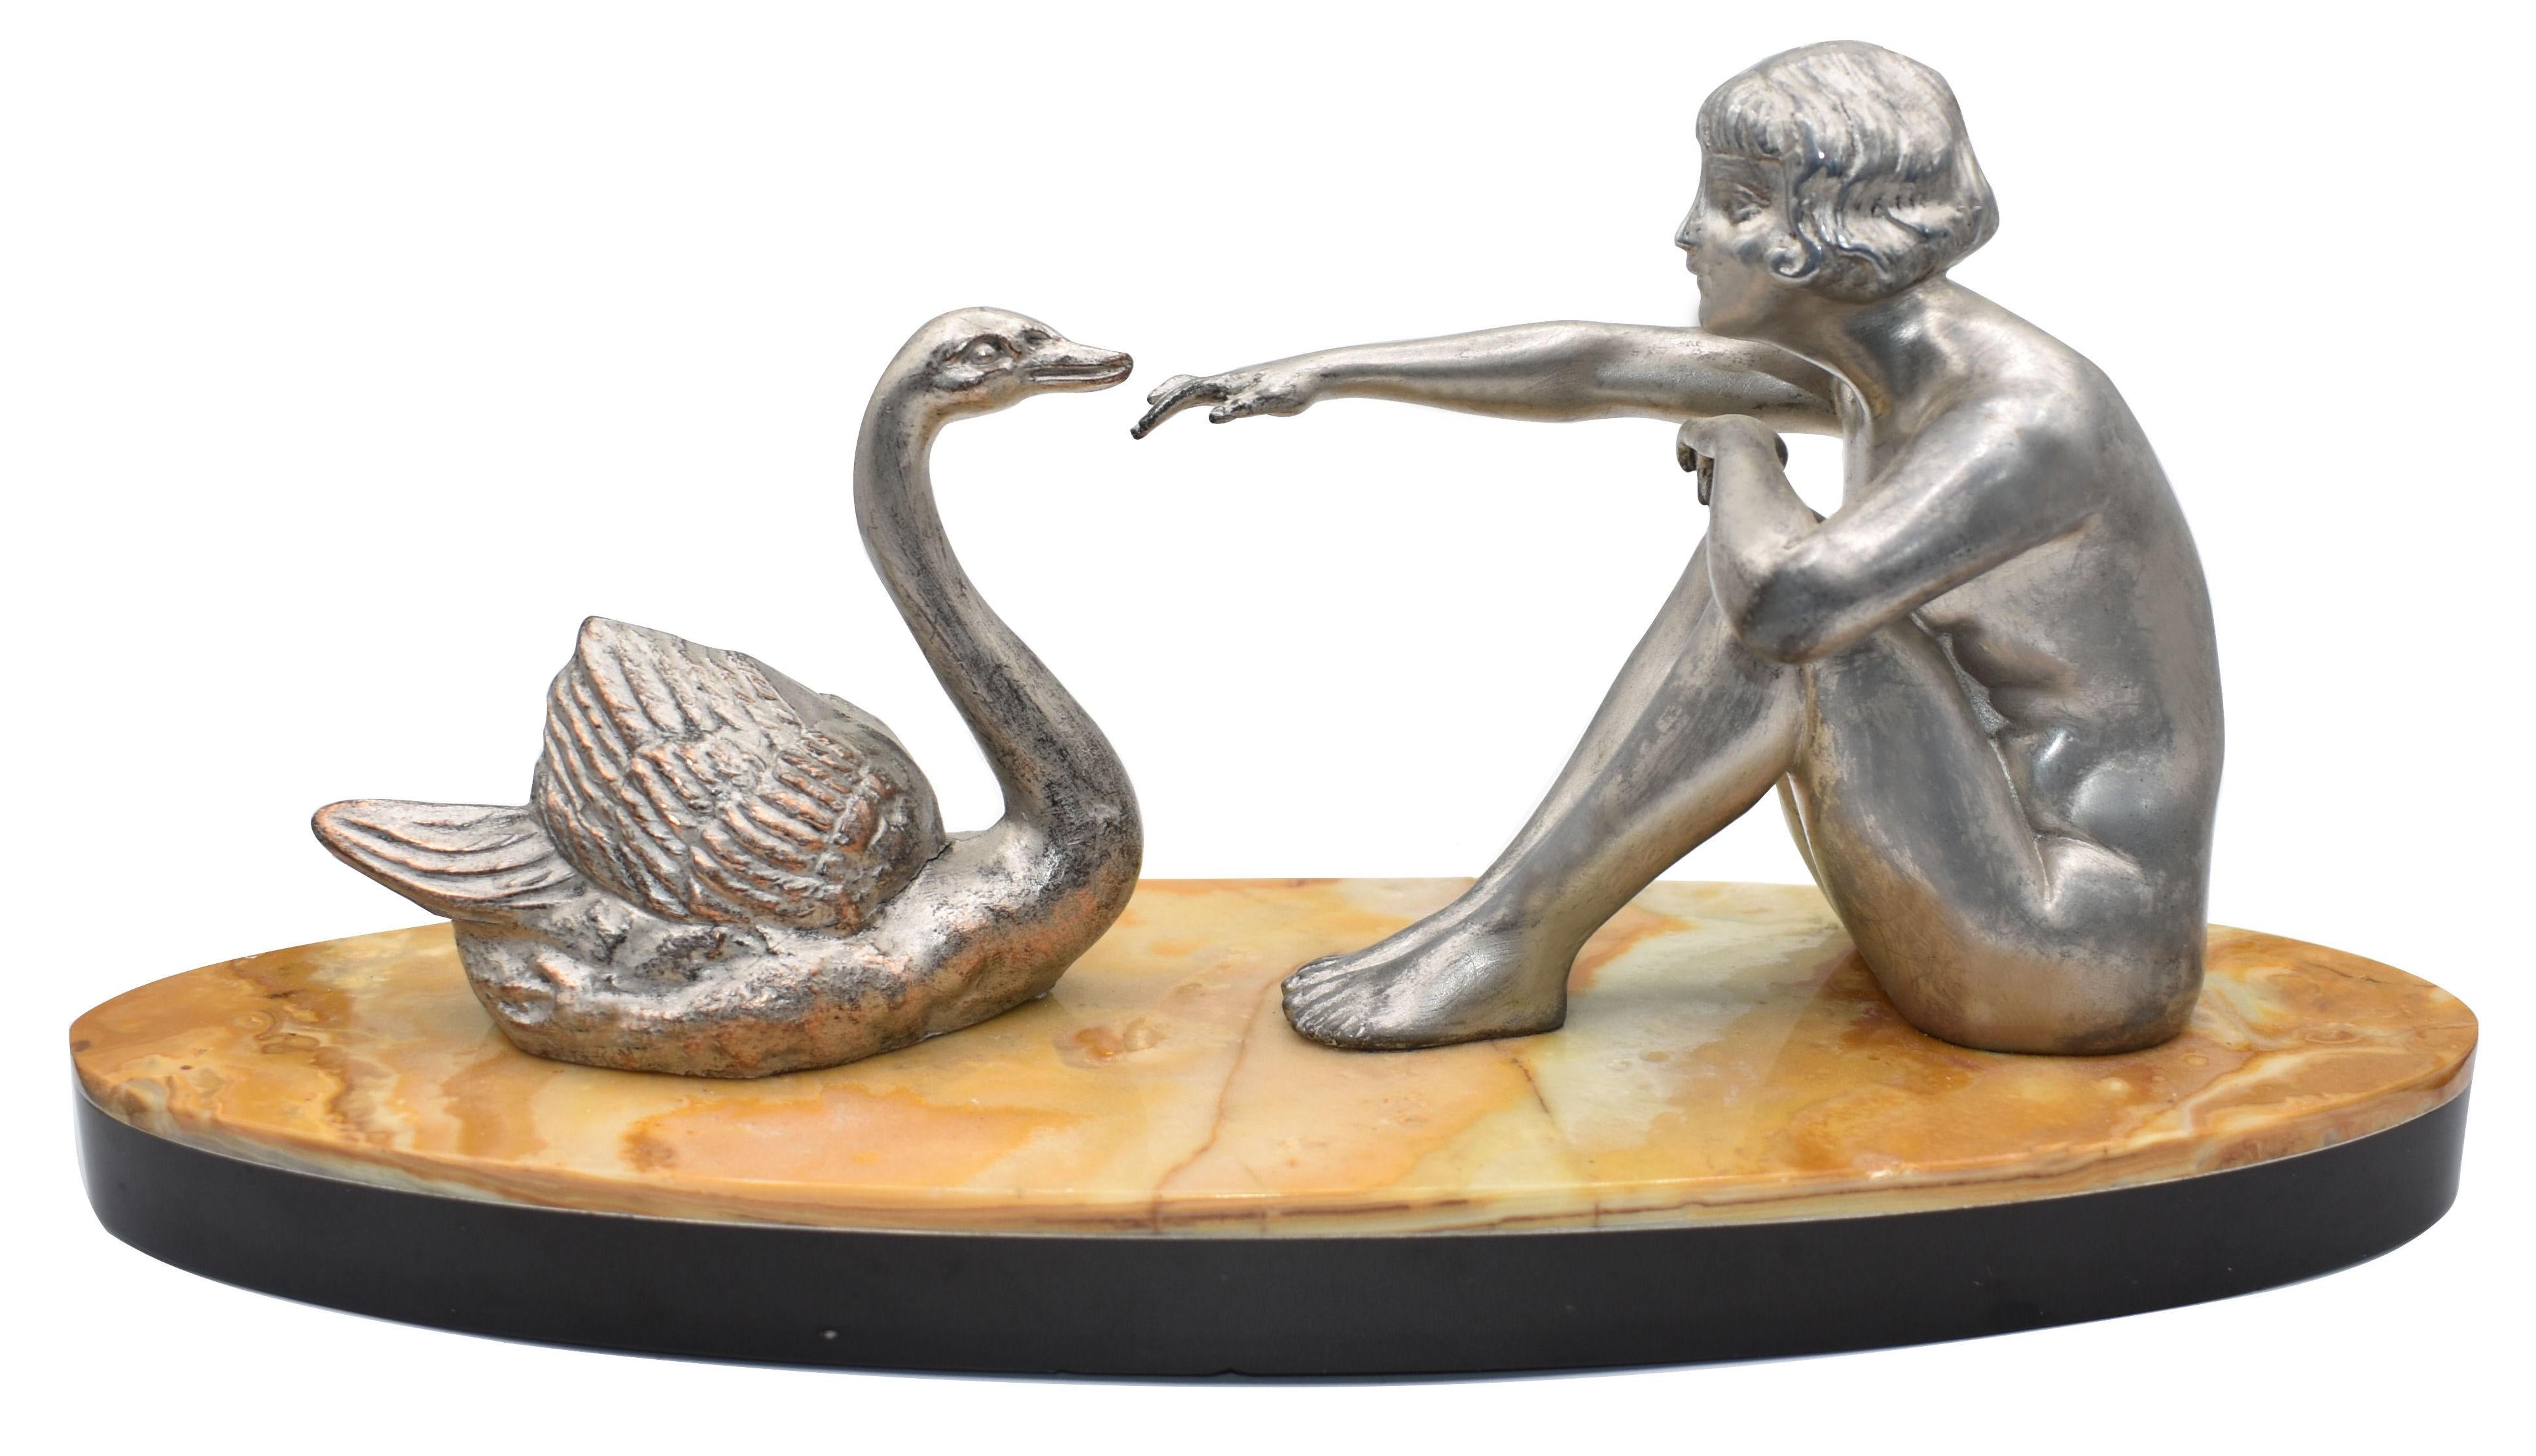 Very charming and original 1930s French figural group, features a young nude lady sat down reaching out to a swan, she has a styled hair cut of her era. The silvered group are beautifully and skillfully detailed, sat upon two-tone oval shaped marble